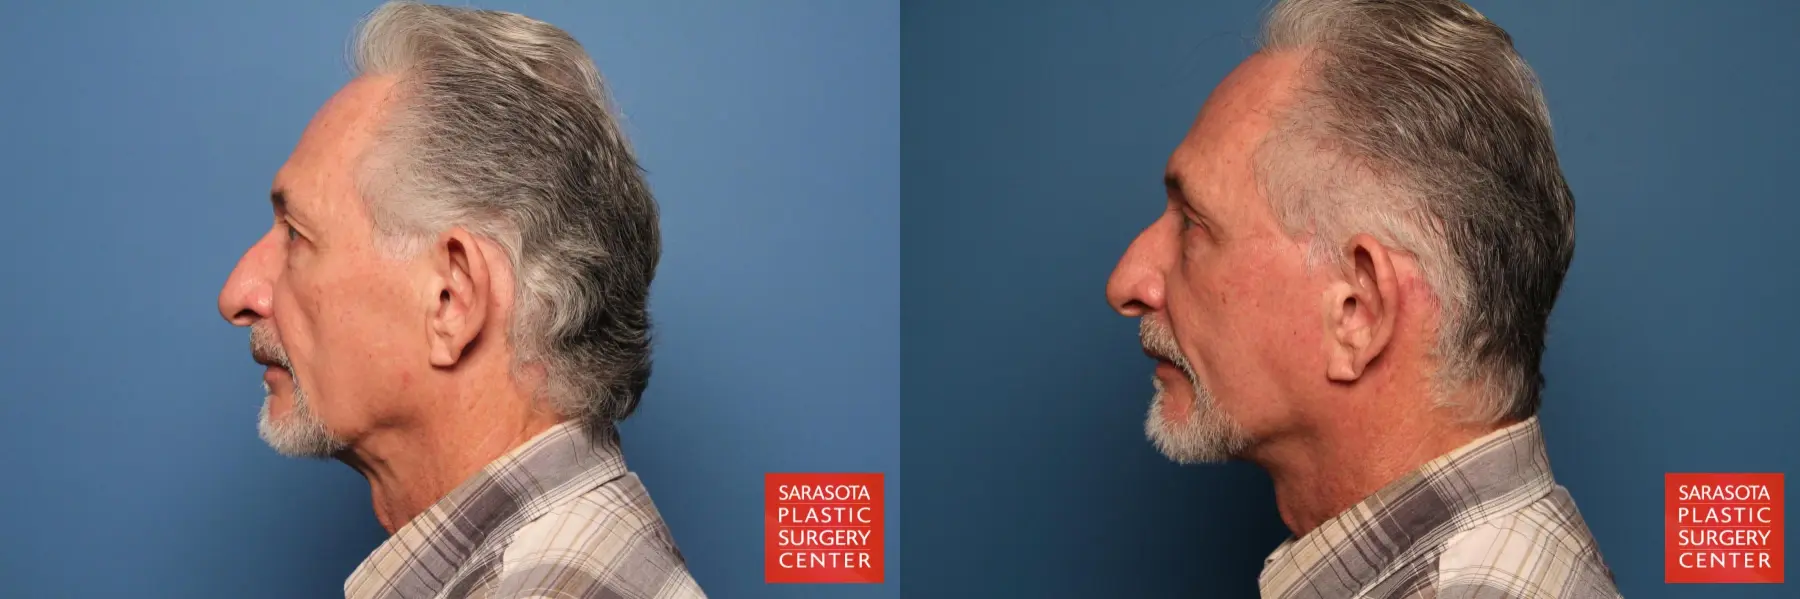 Facelift For Men: Patient 1 - Before and After 3